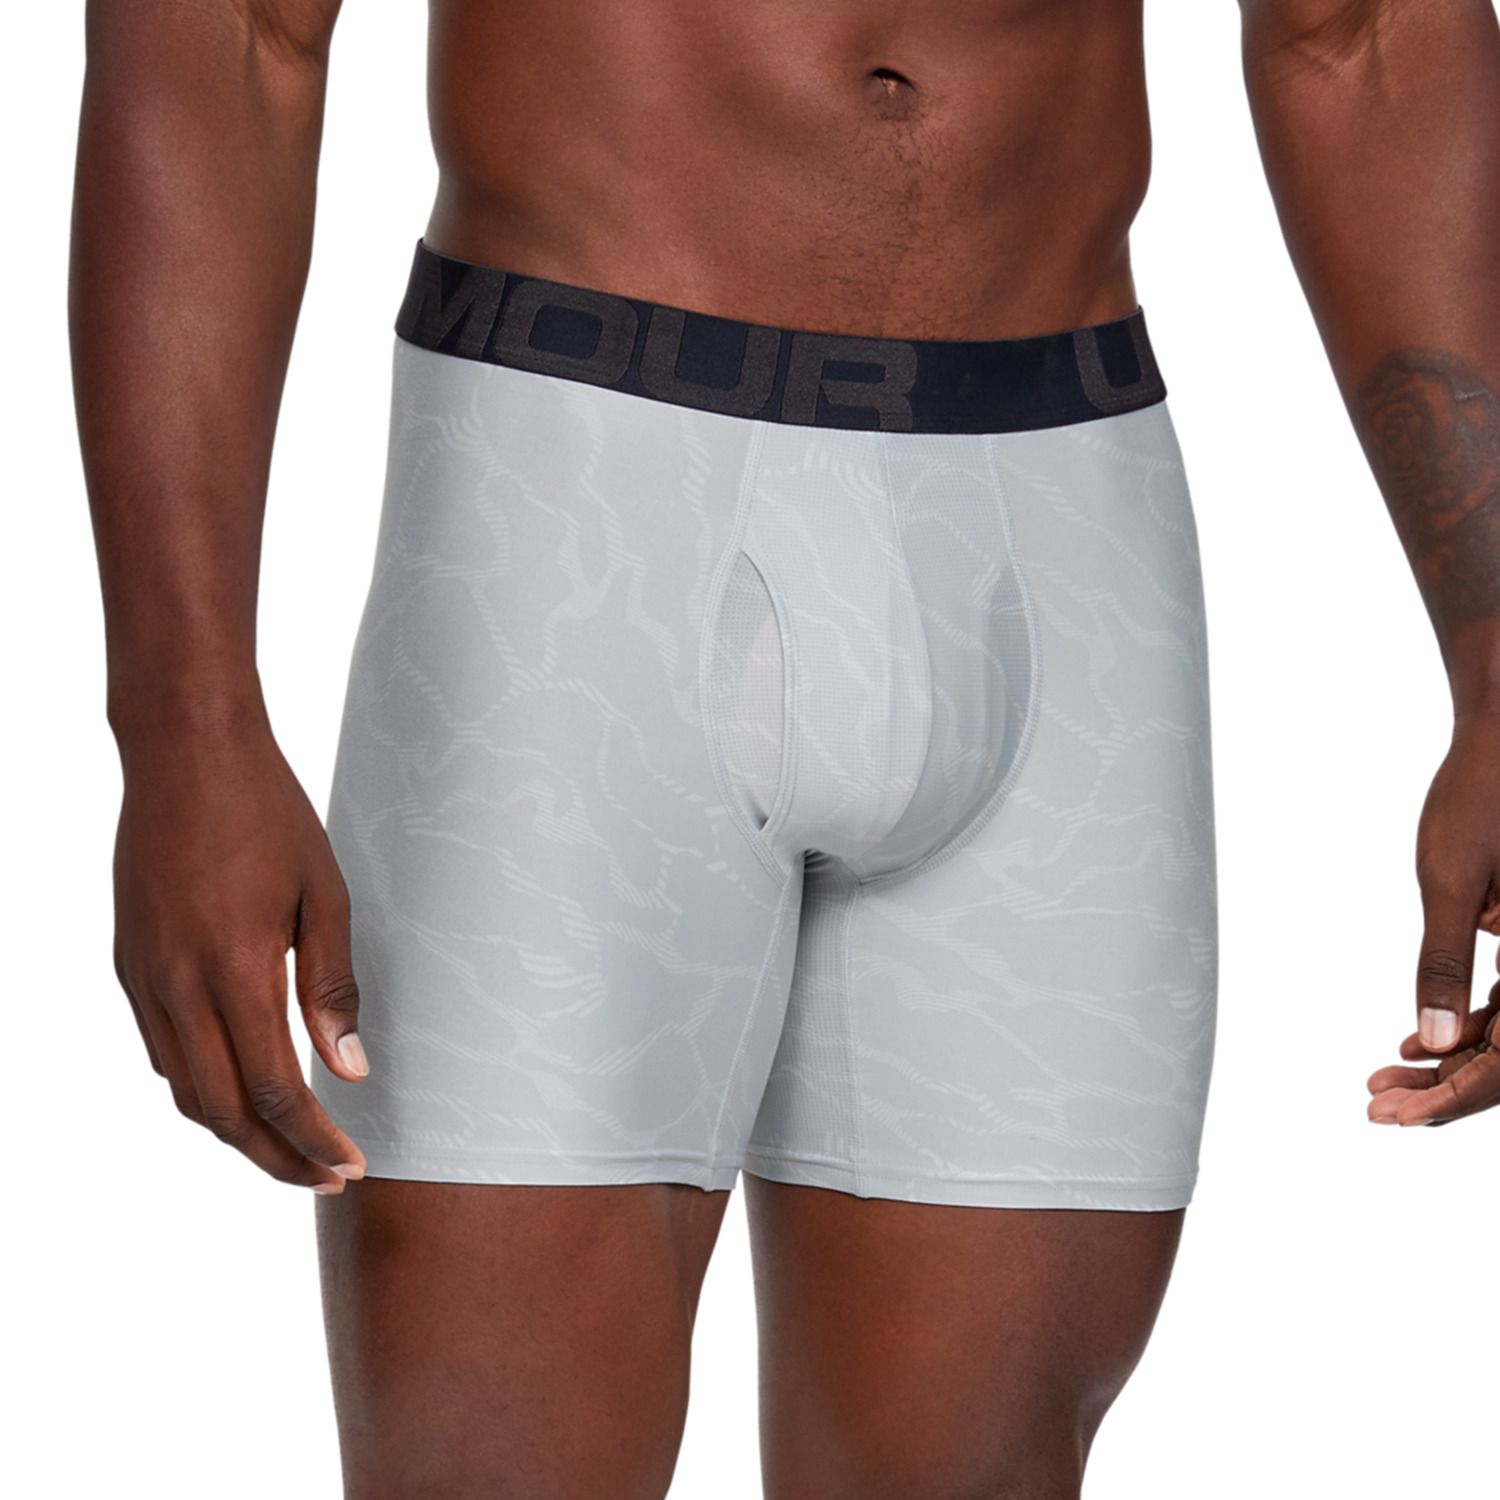 under armour boxer briefs clearance